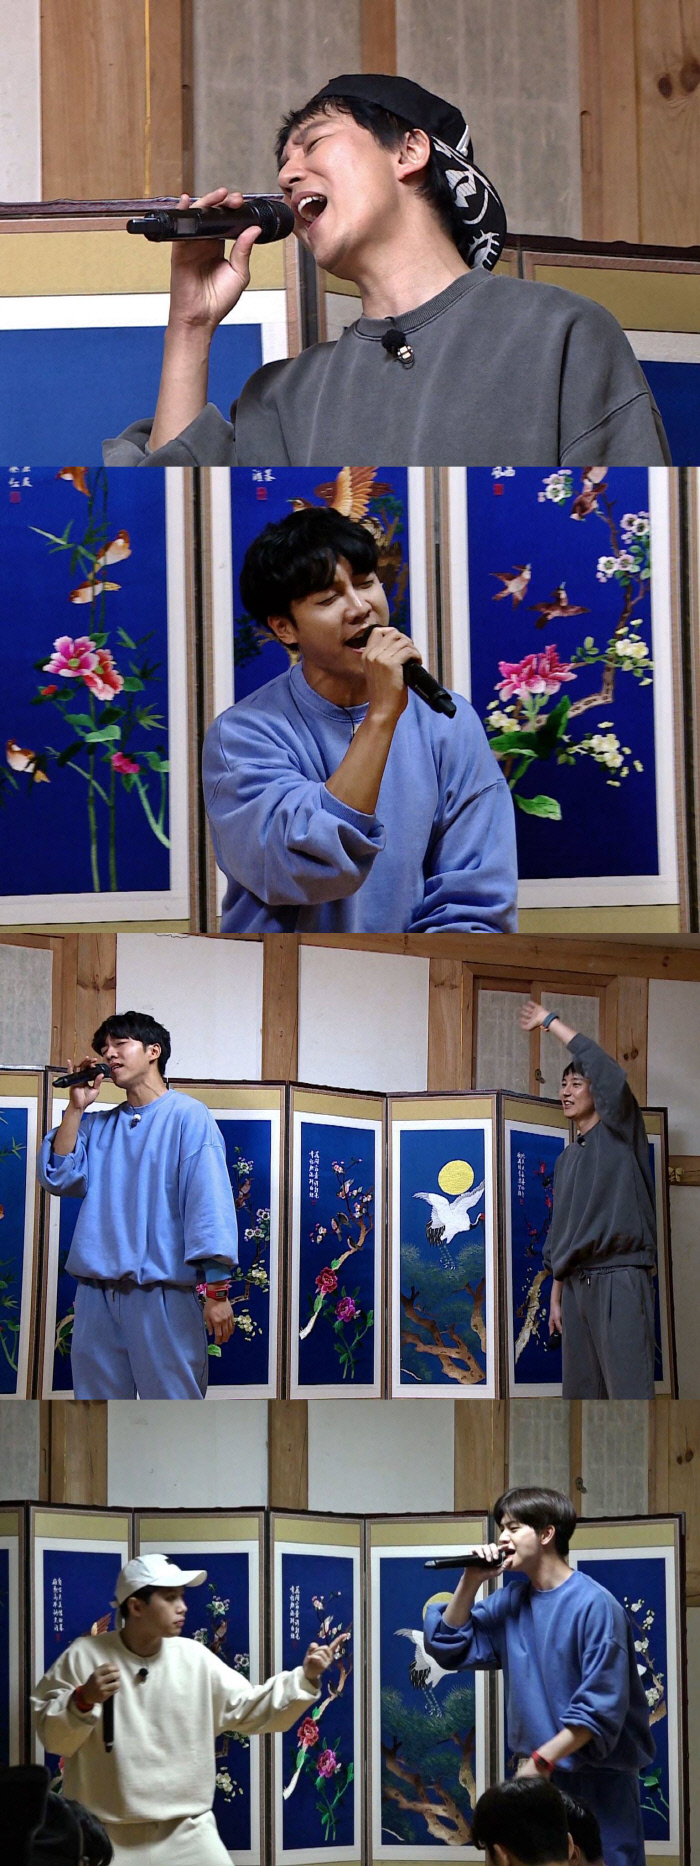 Actor Kim Nam-gil transforms to top goal Idol.Kim Nam-gil recently unveiled his charm of reversal at the SBS All The Butlers shooting site.Kim Nam-gil and members Shin Sung-rok, Lee Sang-yoon, Lee Seung-gi, Yang Se-hyung and Yang Sung-jae exploded in the karaoke room.They summoned the 90s favorite songs such as Tears and Meng, and became a so-called Topgol Idol.In particular, Kim Nam-gil has raised the atmosphere 200% with explosive singing ability and low world tension that was not seen anywhere.The members also had an exciting night, releasing the stage manners they had learned from Park Jin-young, master of the Dance Shin Dance King.Kim Nam-gil attracted attention not only by dancing but also by fully digesting Lee So-ras usual favorite song Please.His sweet singing skills were not only impressed by the production crew, but also Lee Seung-gi, who had remade the same song earlier.Lee Seung-gi, impressed by the masters song, responded with a song.The two mens Honey Ttuk live, which will bomb the womans heart, will be available at 6:25 pm on the 16th.